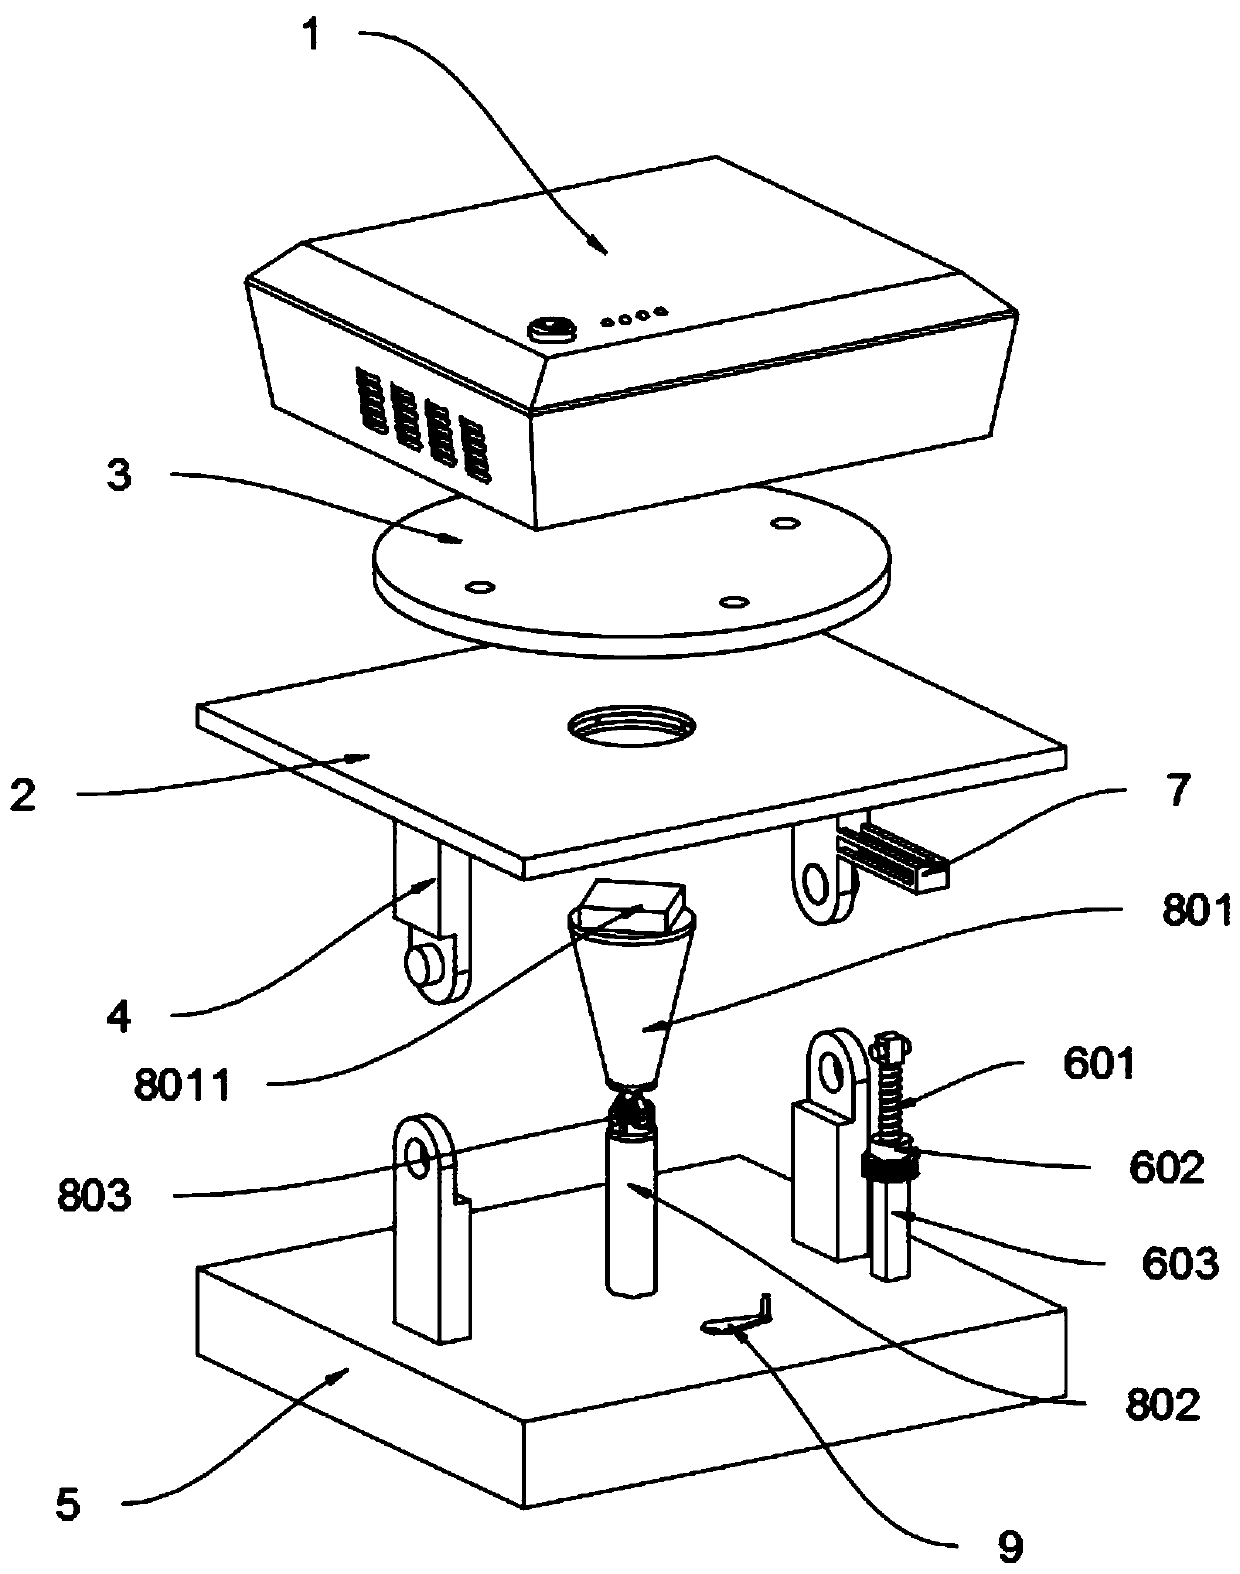 Peripheral wireless connection projection device